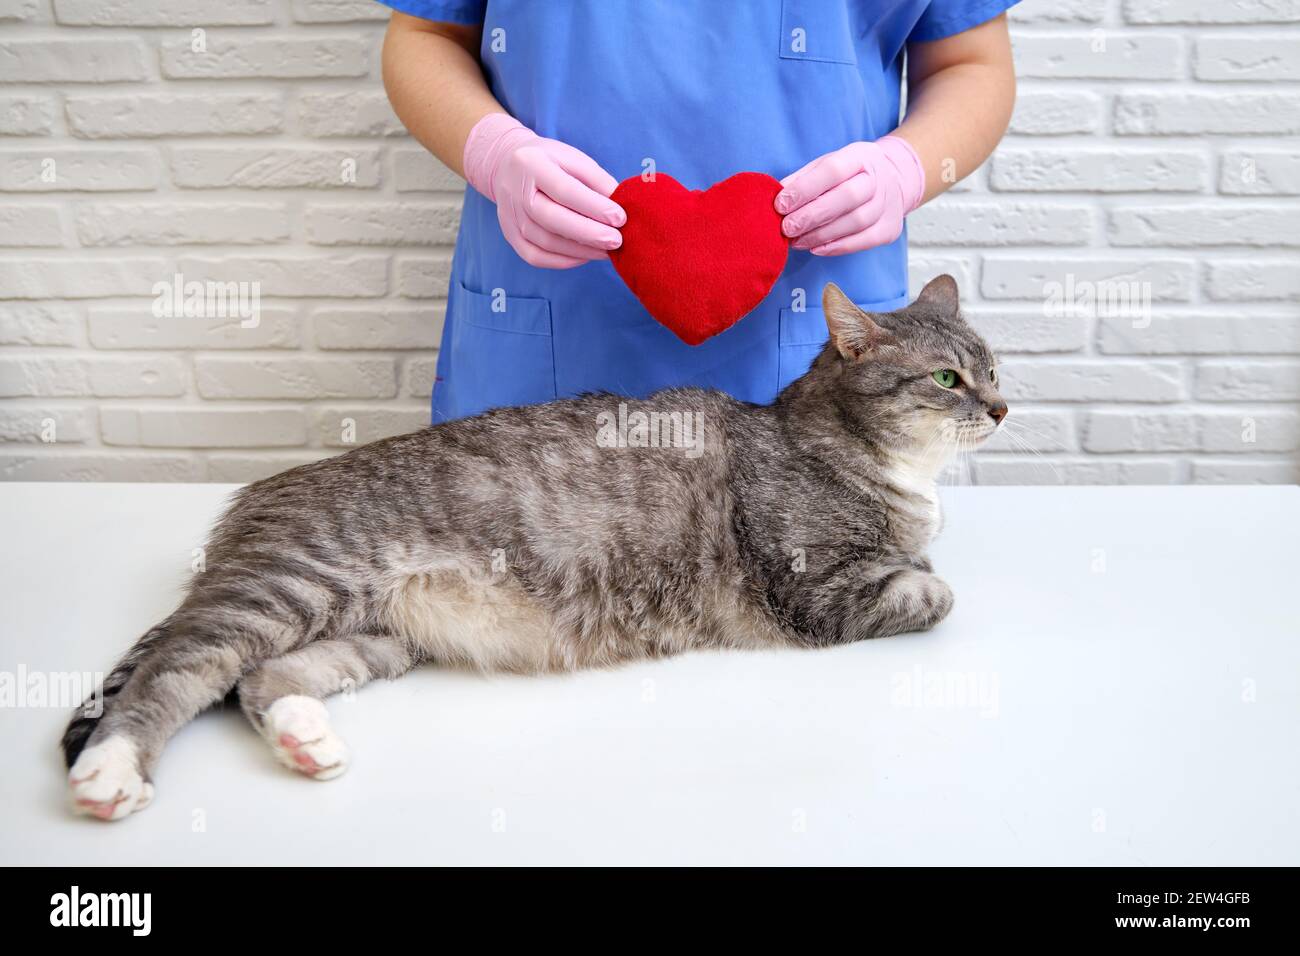 Red heart in the hands of the veterinarian as a sign of love for animals in the pet clinic Stock Photo